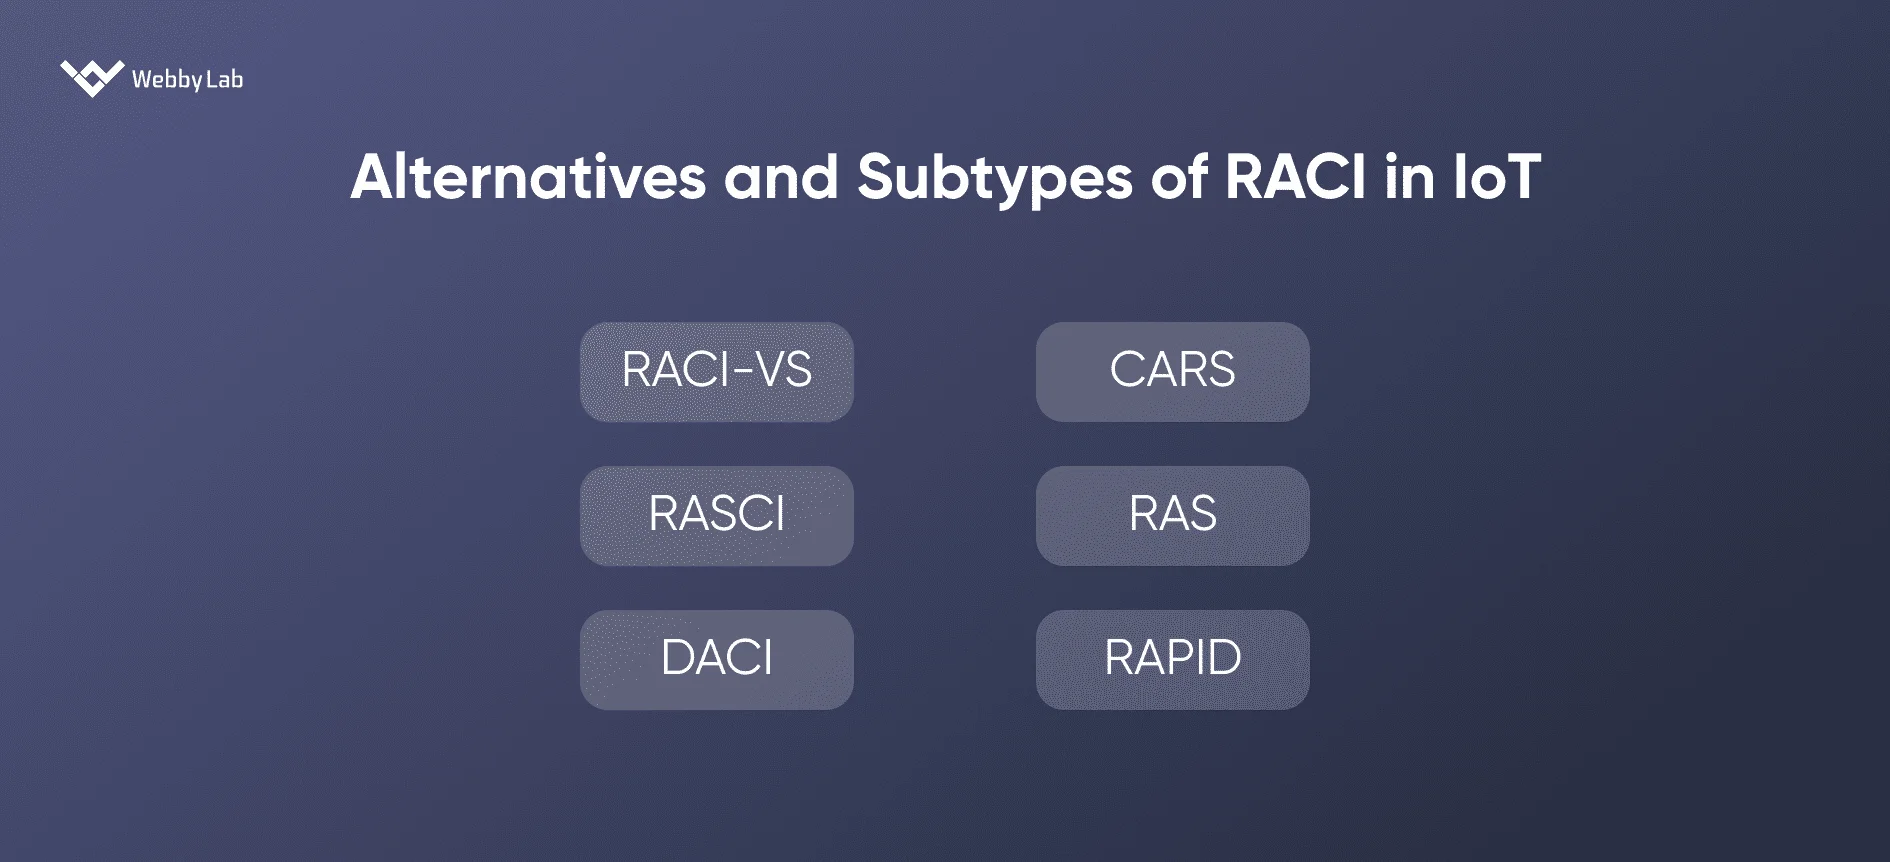 Subtypes of RACI in IoT